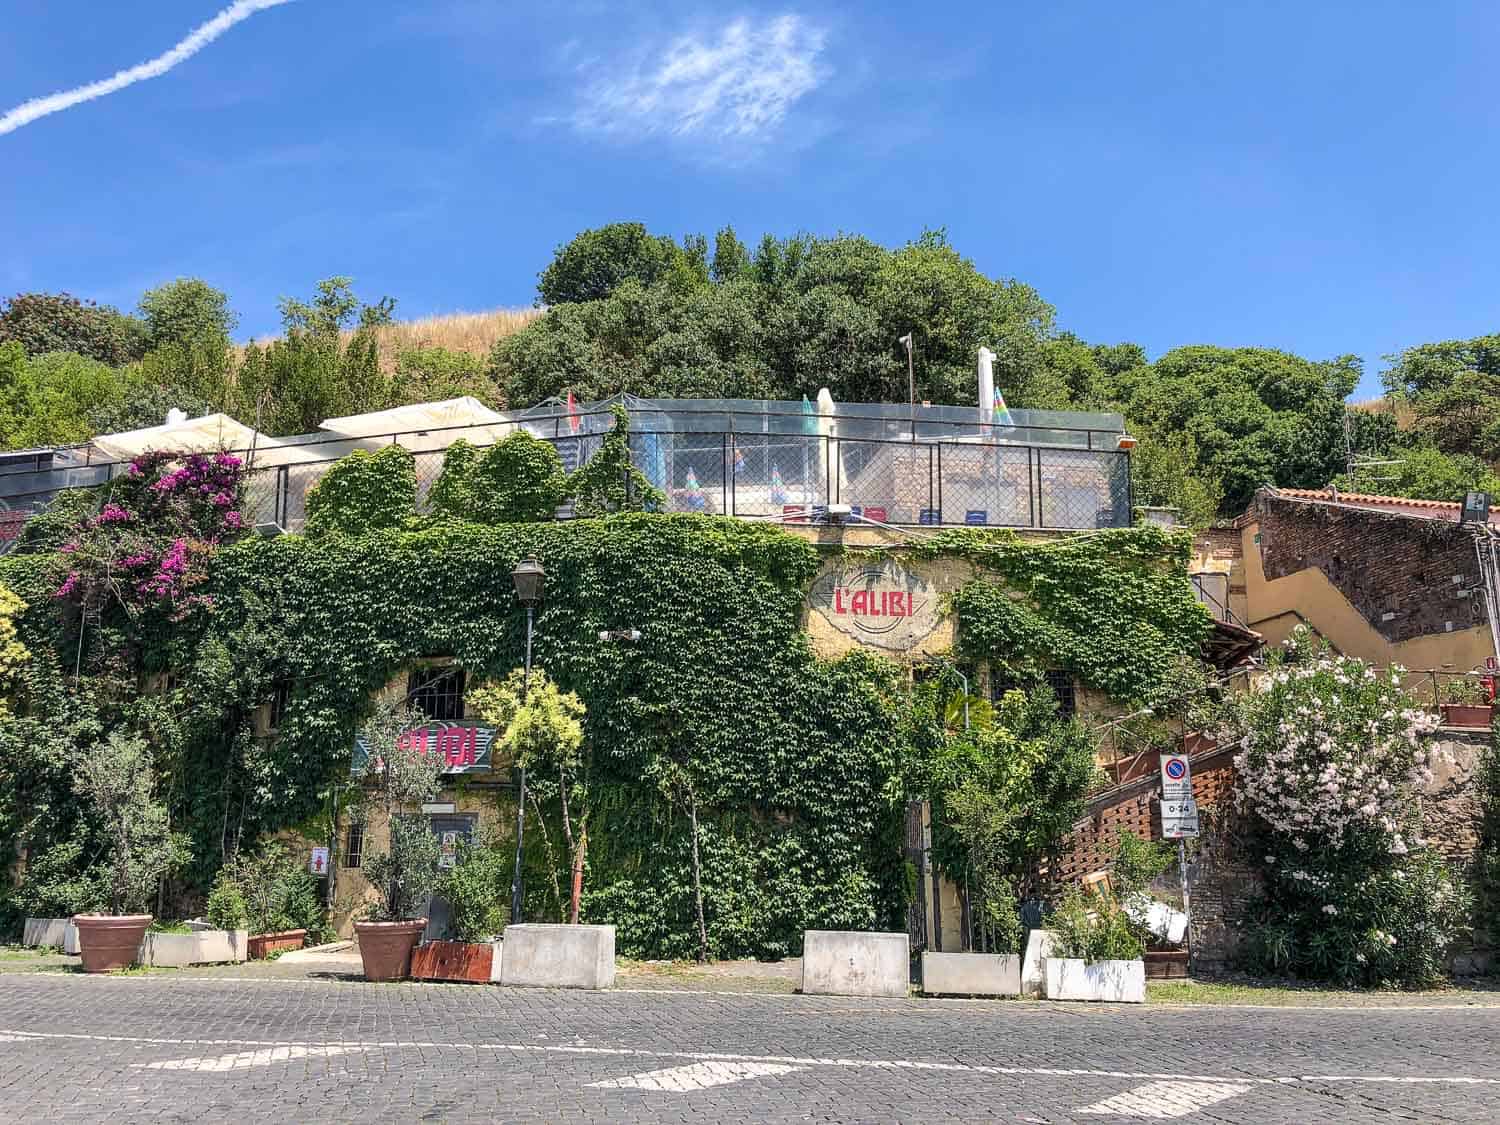 L'Alibi is one of a row of clubs built into Monte Testaccio, Rome